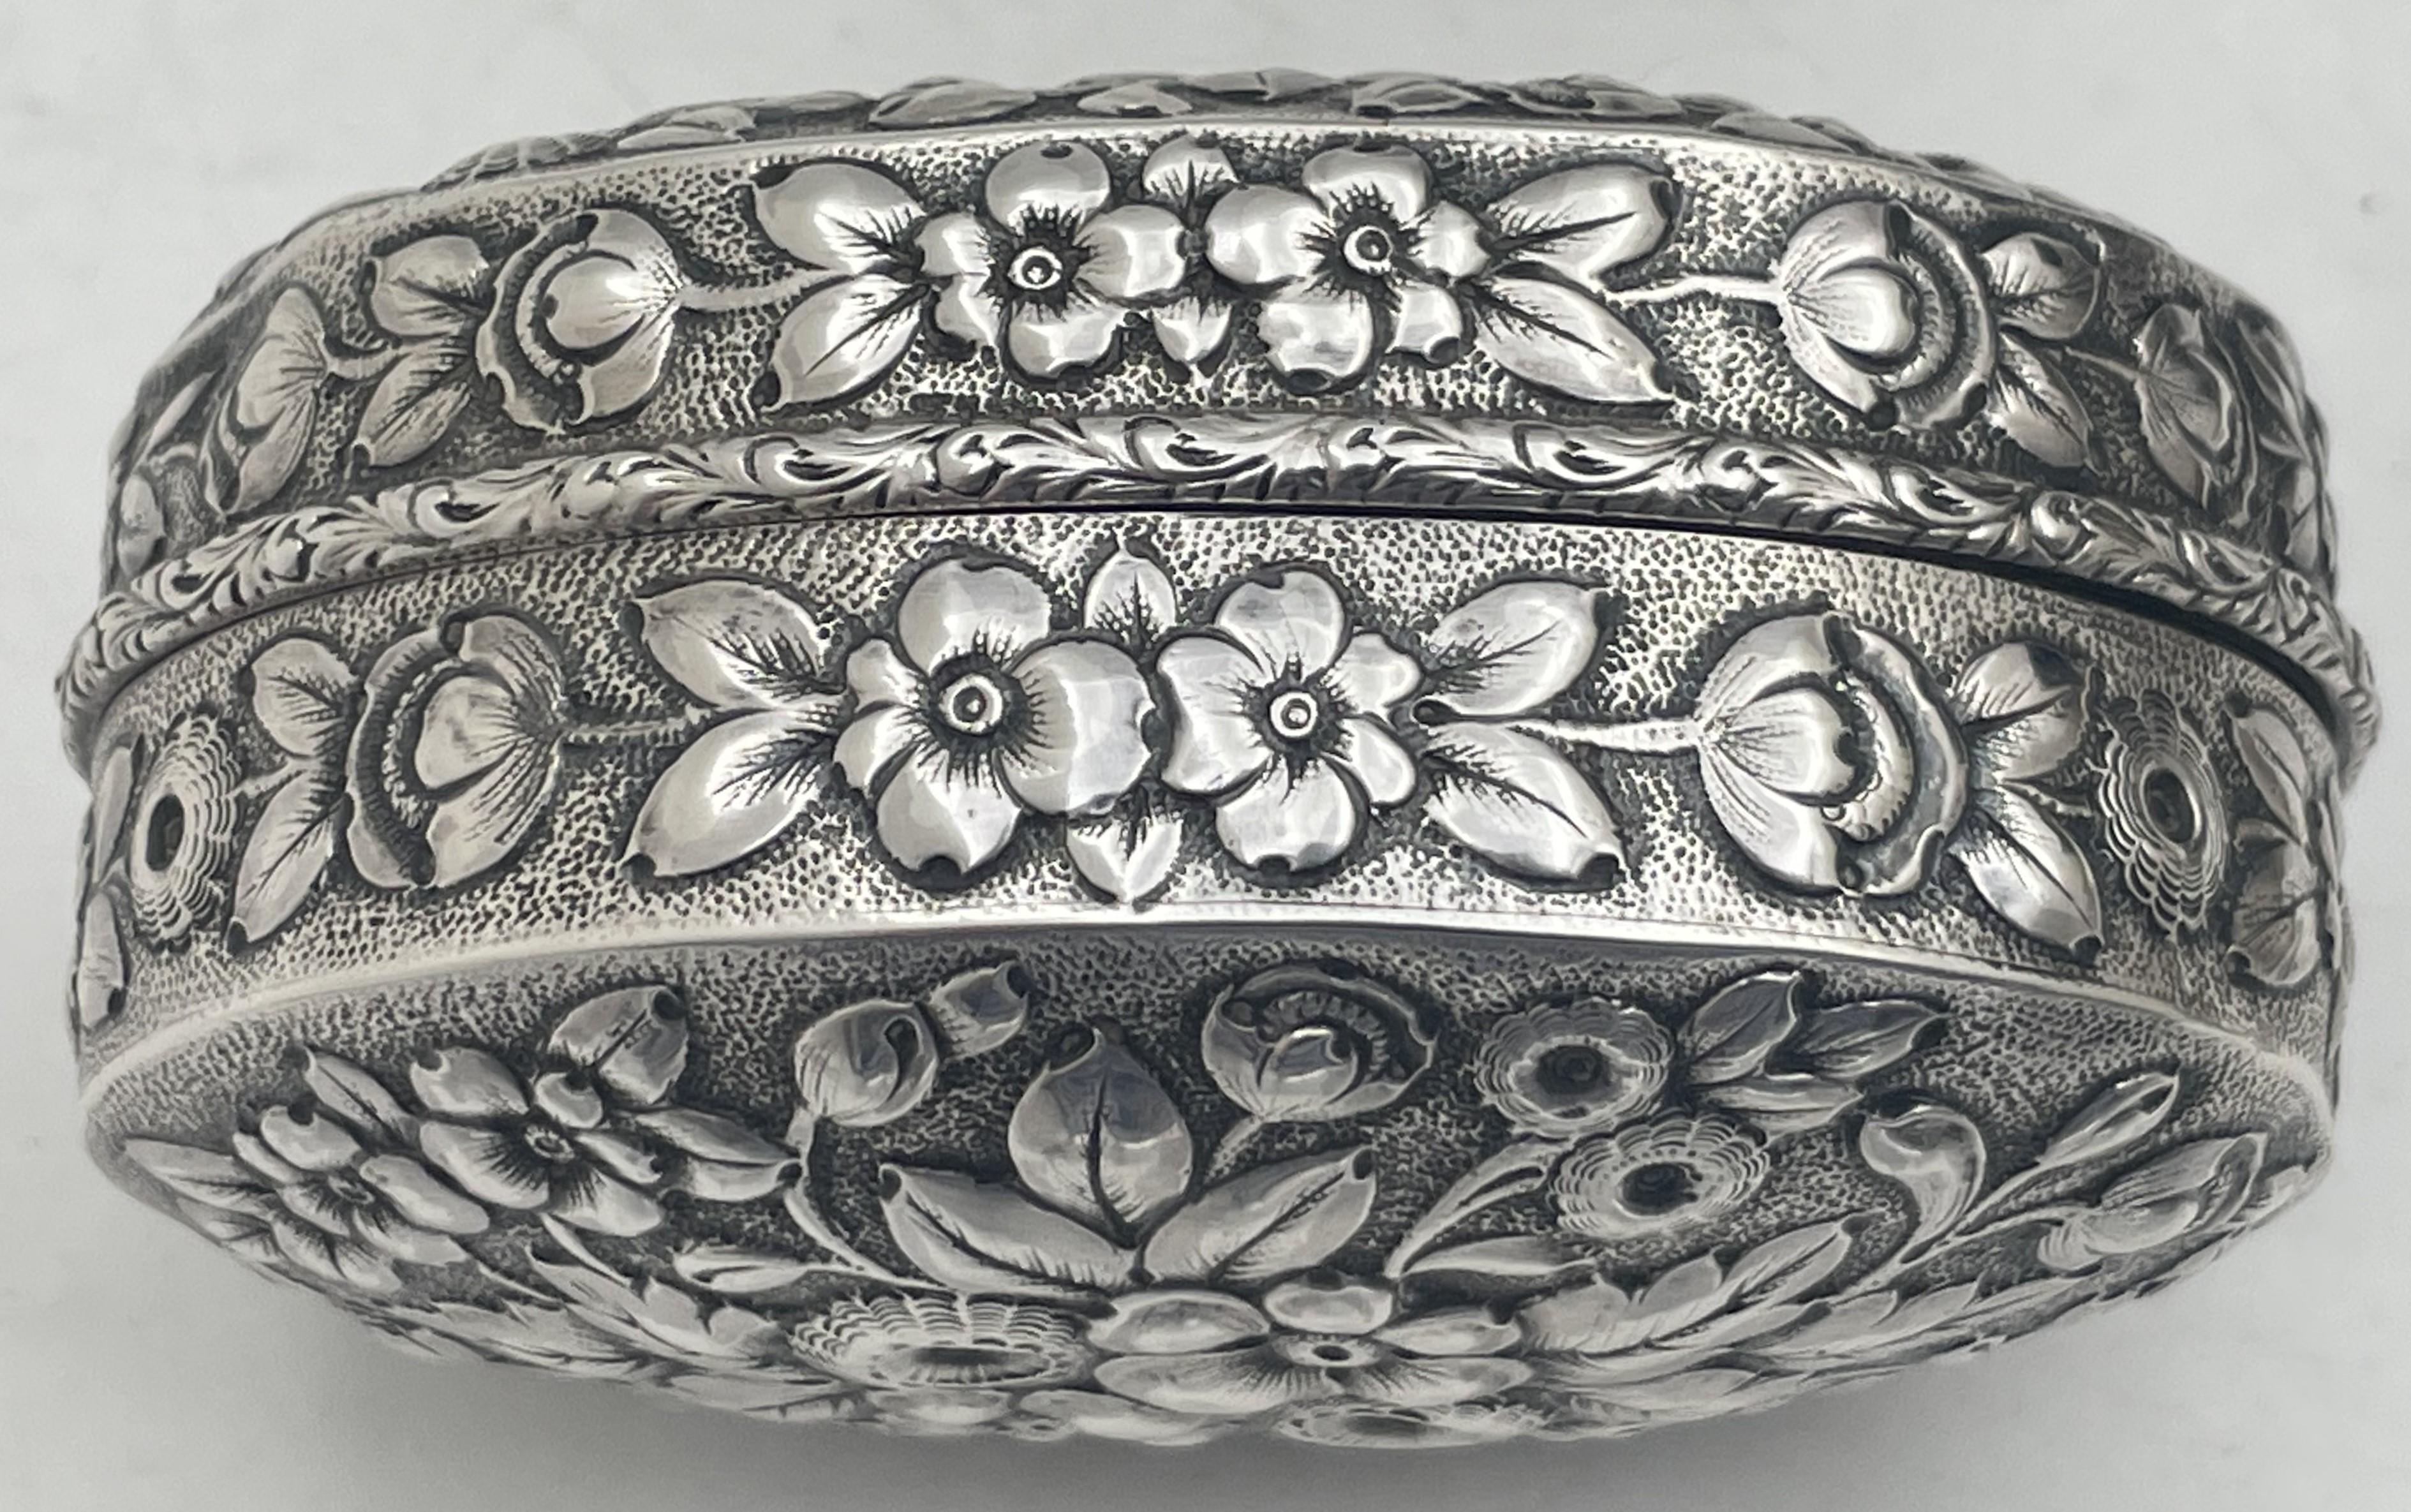 Dominick & Haff / Bailey, Banks & Biddle Oval Repousse-Schnupftabakdose aus Sterlingsilber (Repoussé) im Angebot